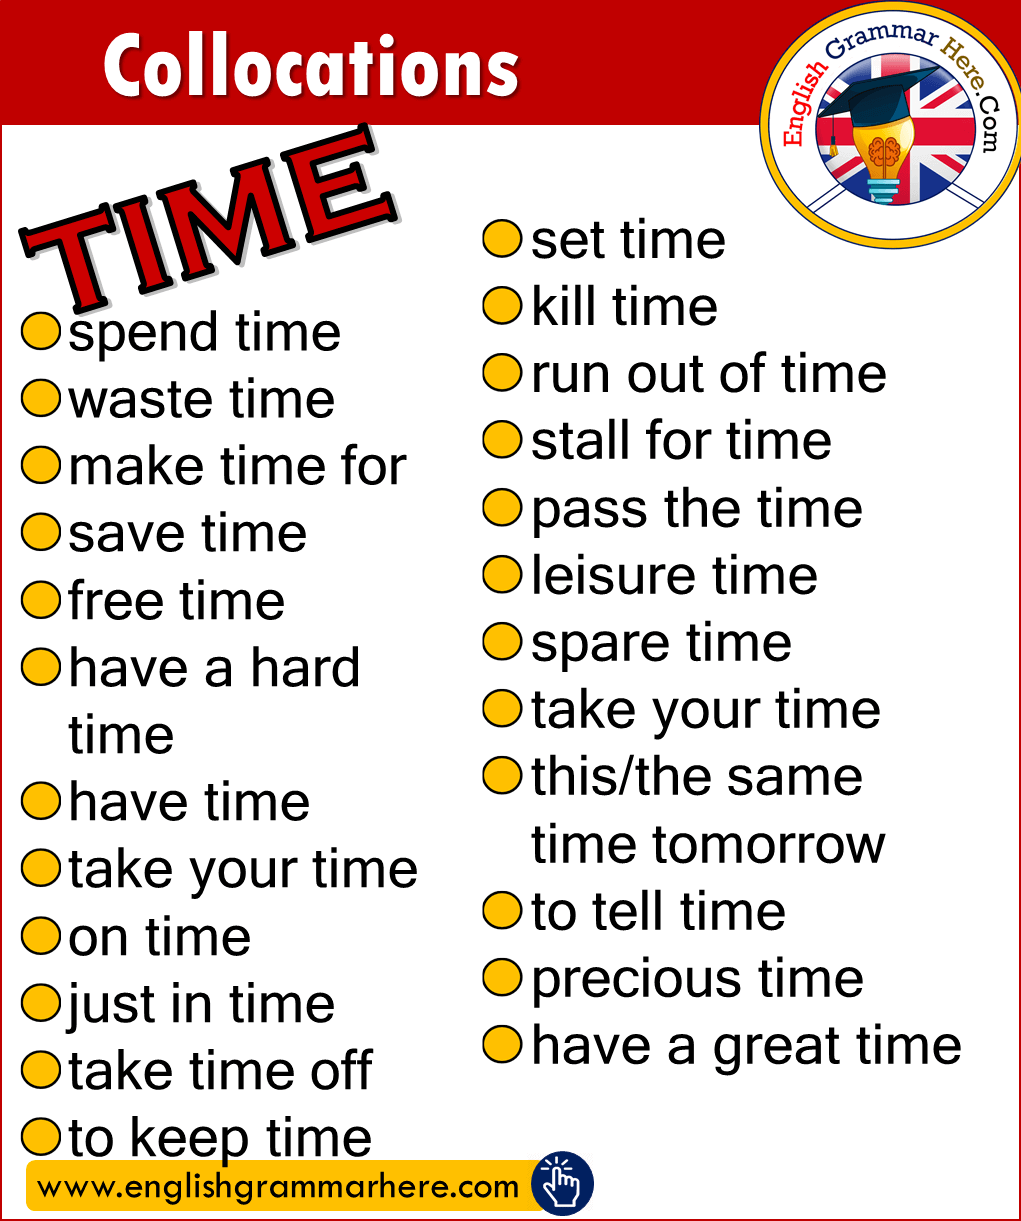 Collocations with TIME in English